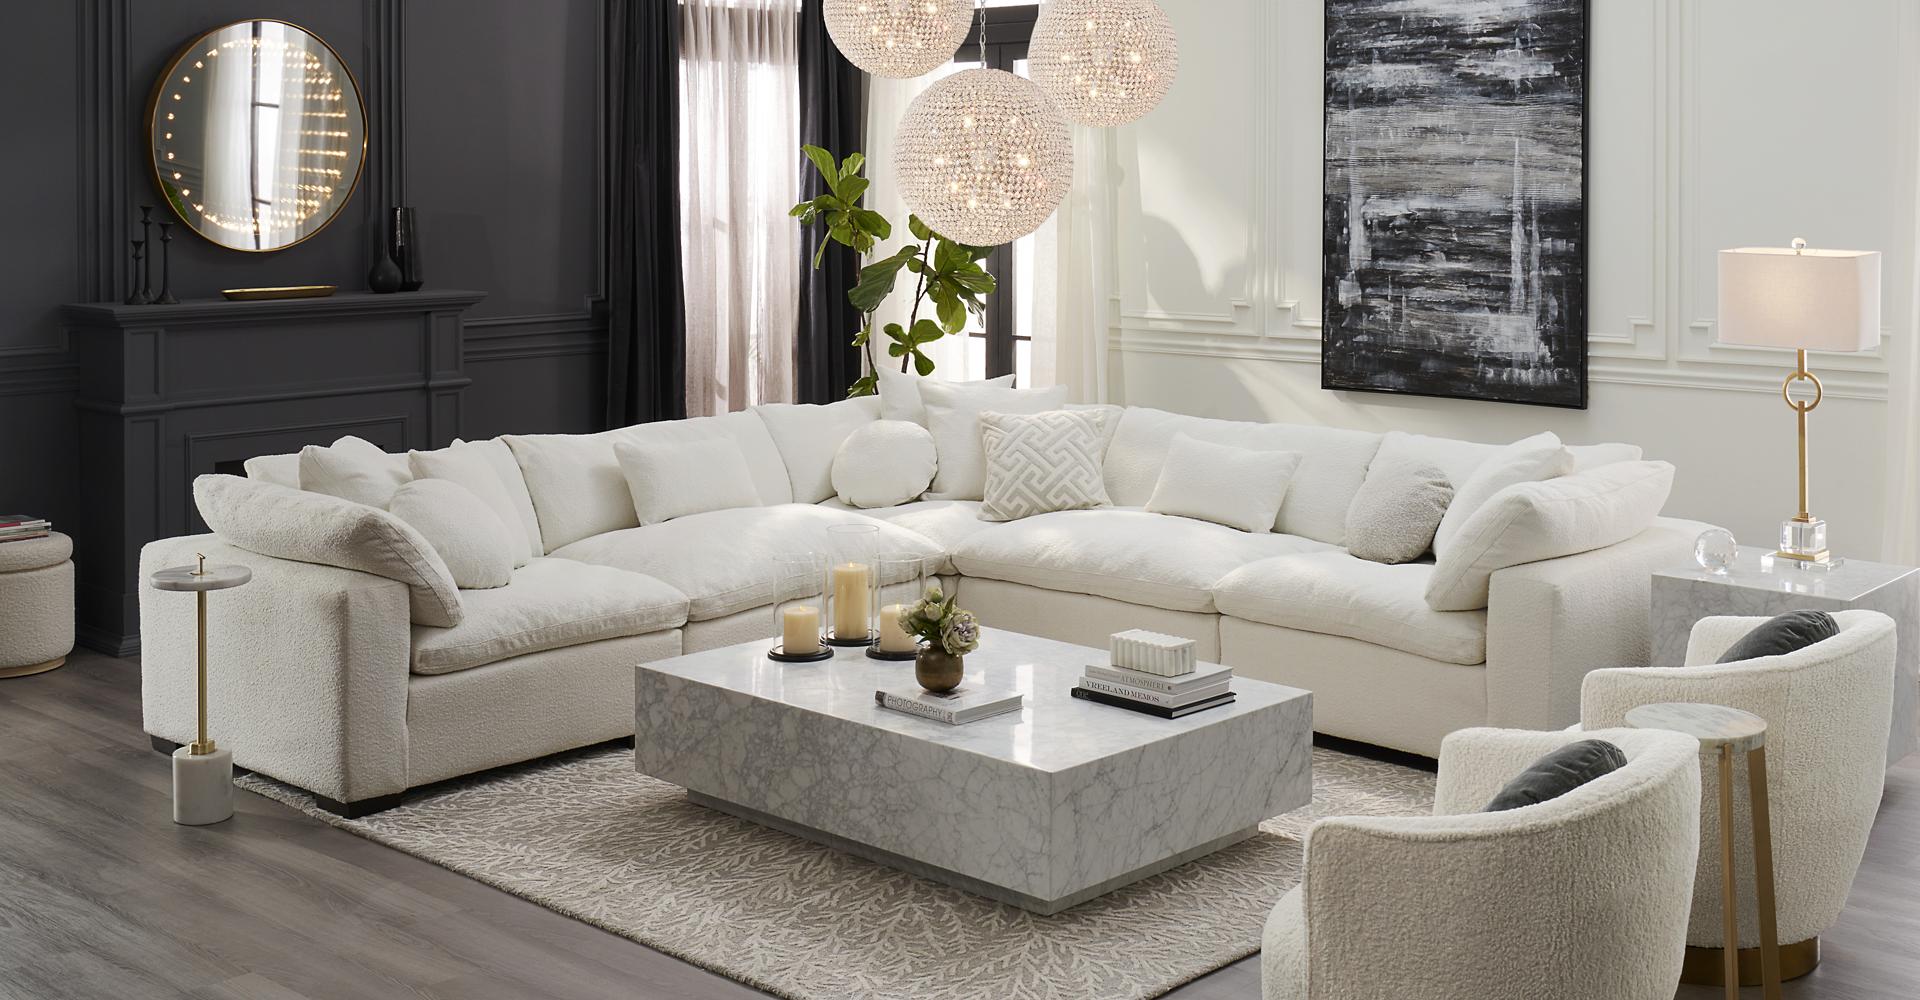 Plush 5 piece sectional in boucle in a room with 2 boucle chairs